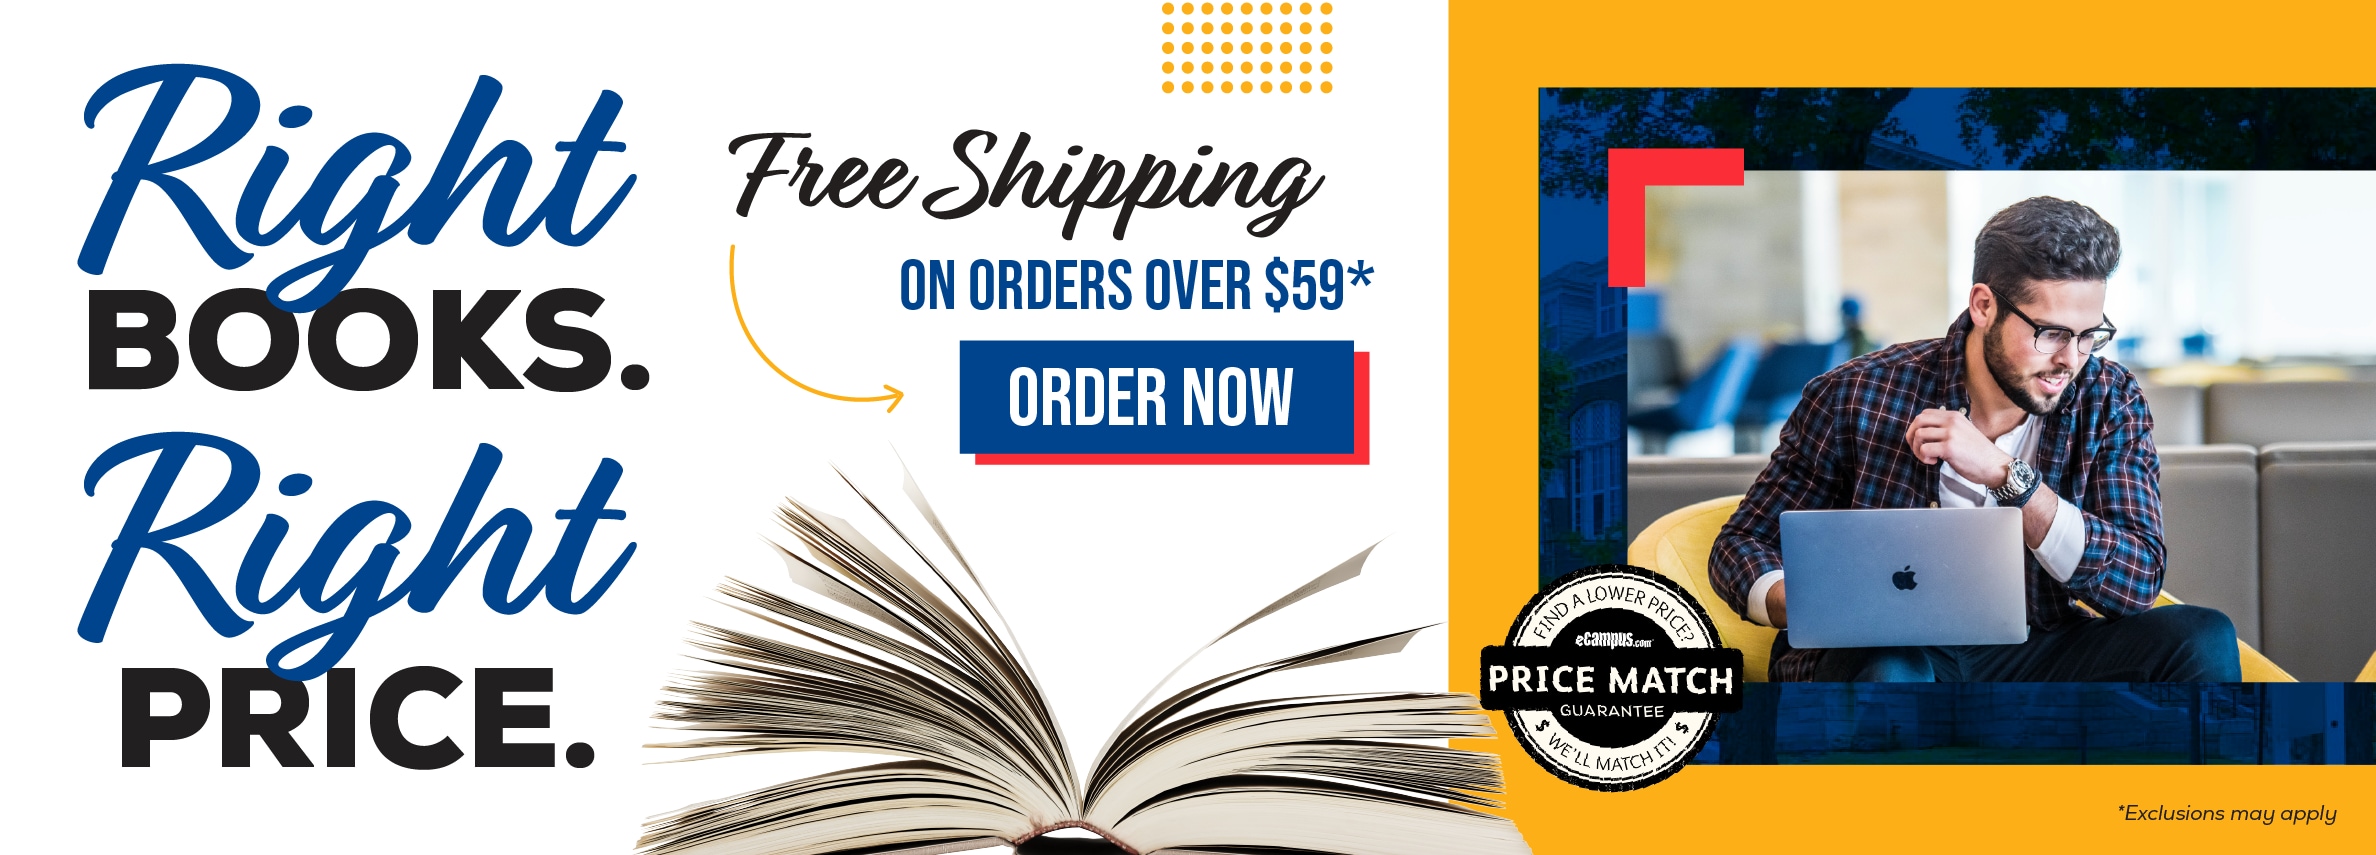 Right books. Right price. Free shipping on orders over $59.* Order now. Price Match Guarantee. *Exclusions may apply.